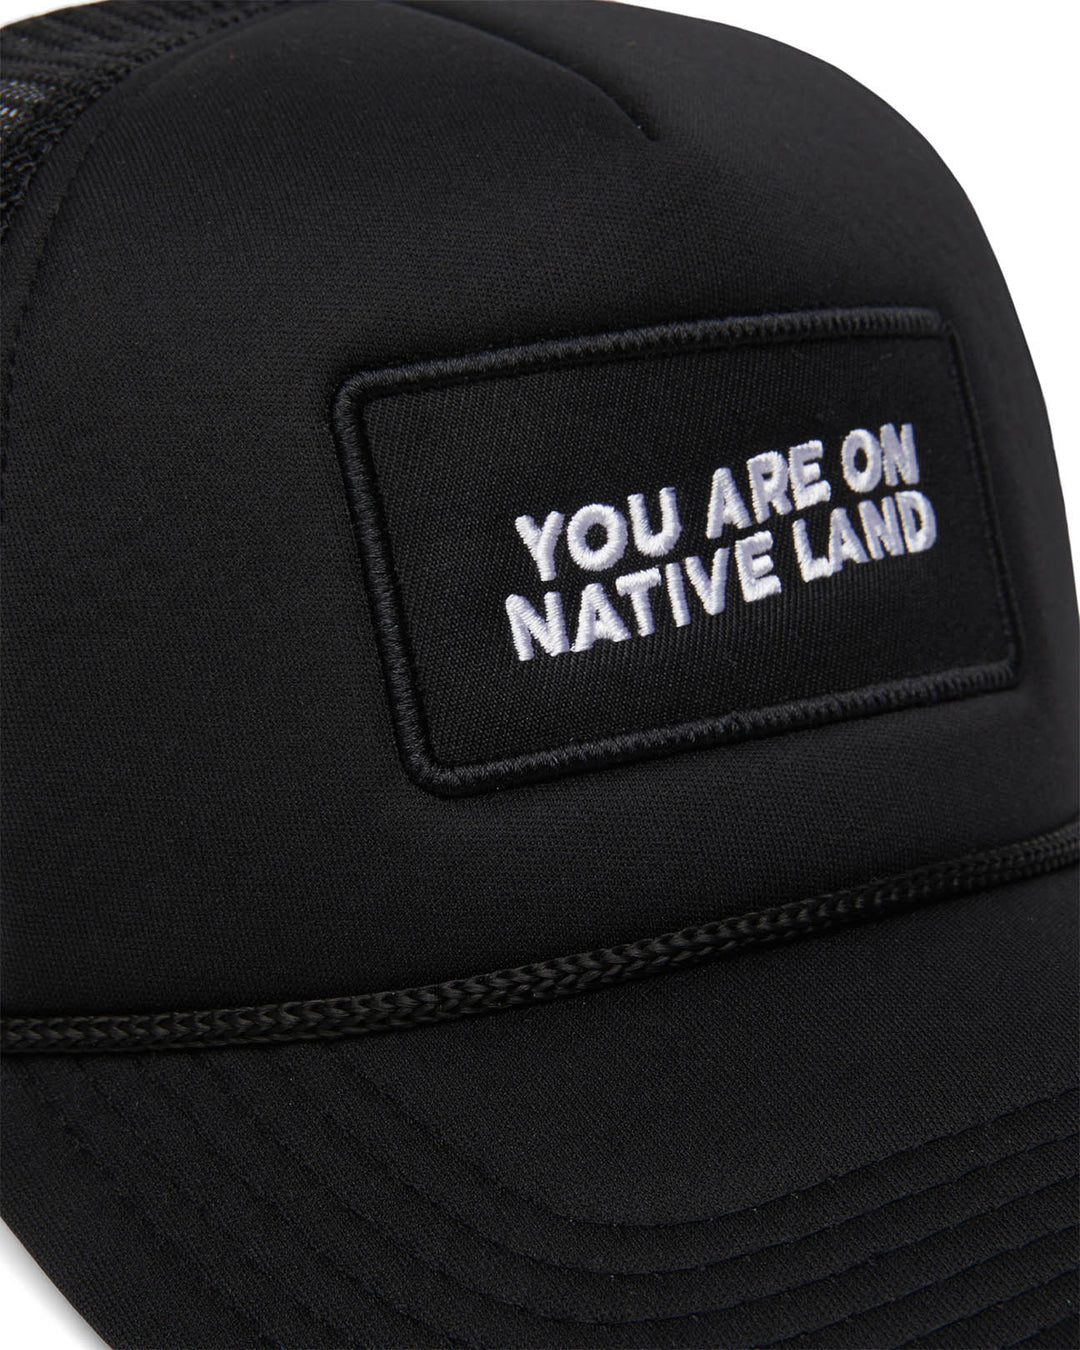 Detail photo of “You Are On Native Land” trucker hat in black embroidery.